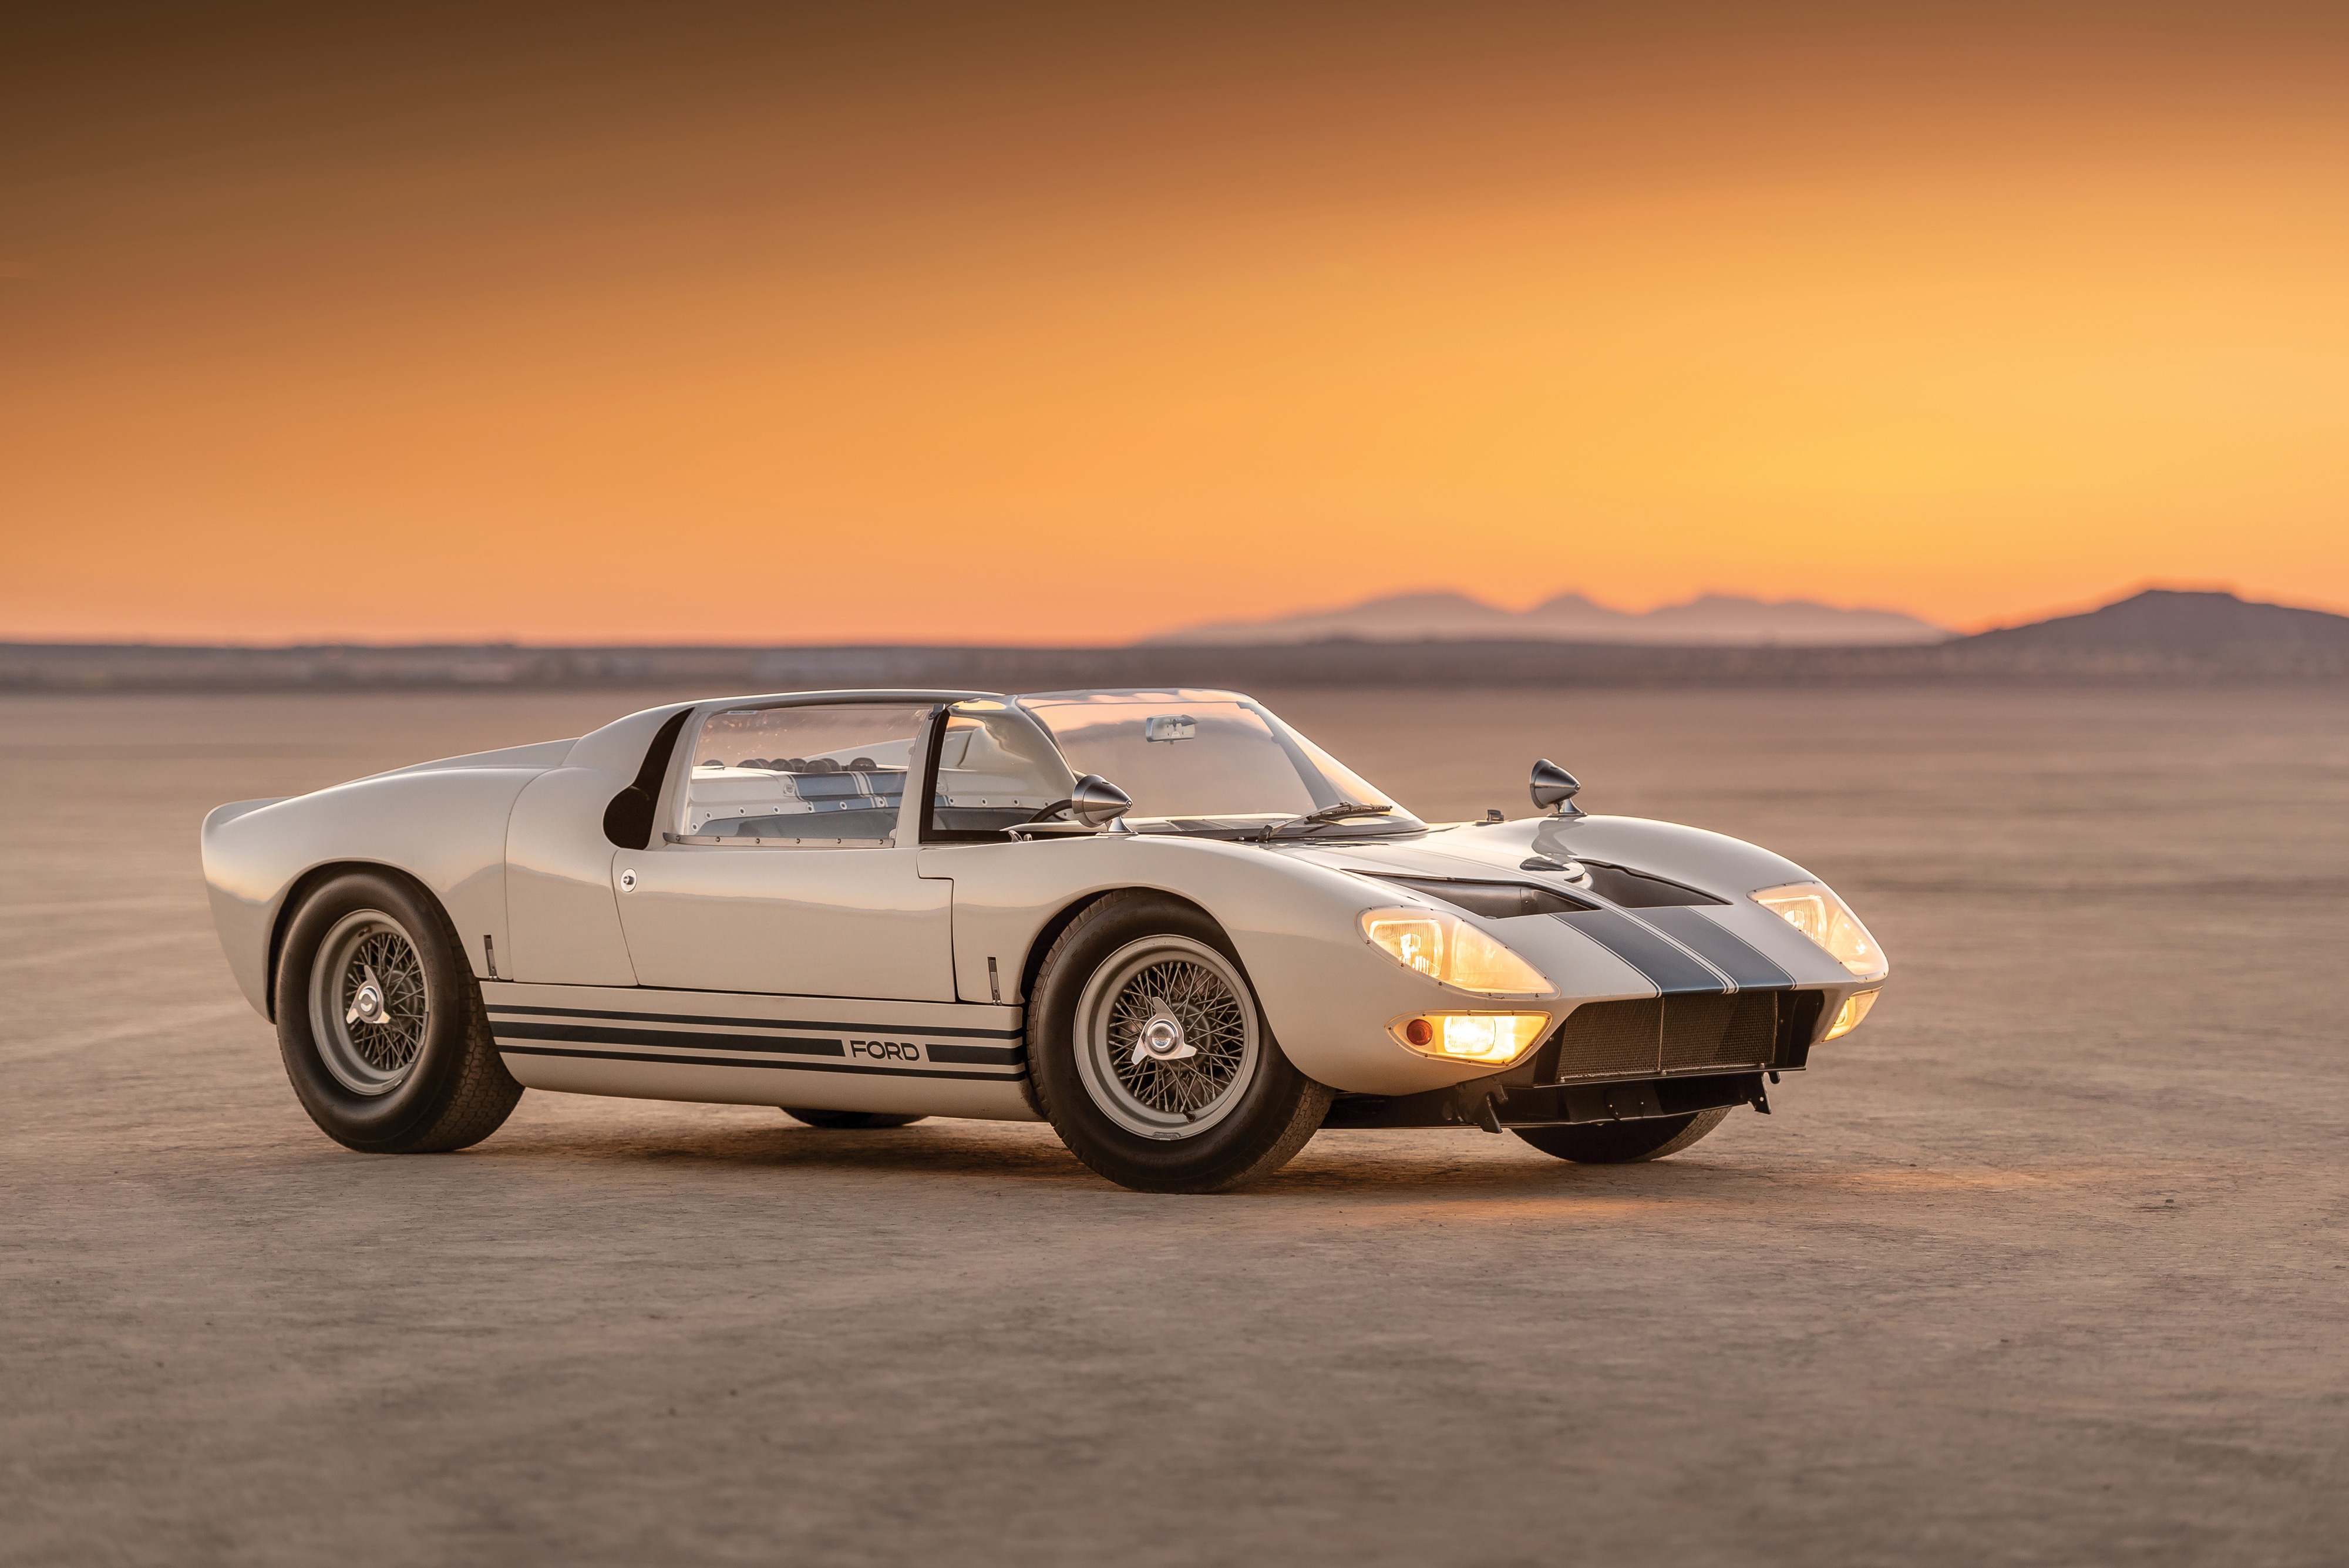 Free download wallpaper Ford, Car, Ford Gt, Vehicles, White Car on your PC desktop